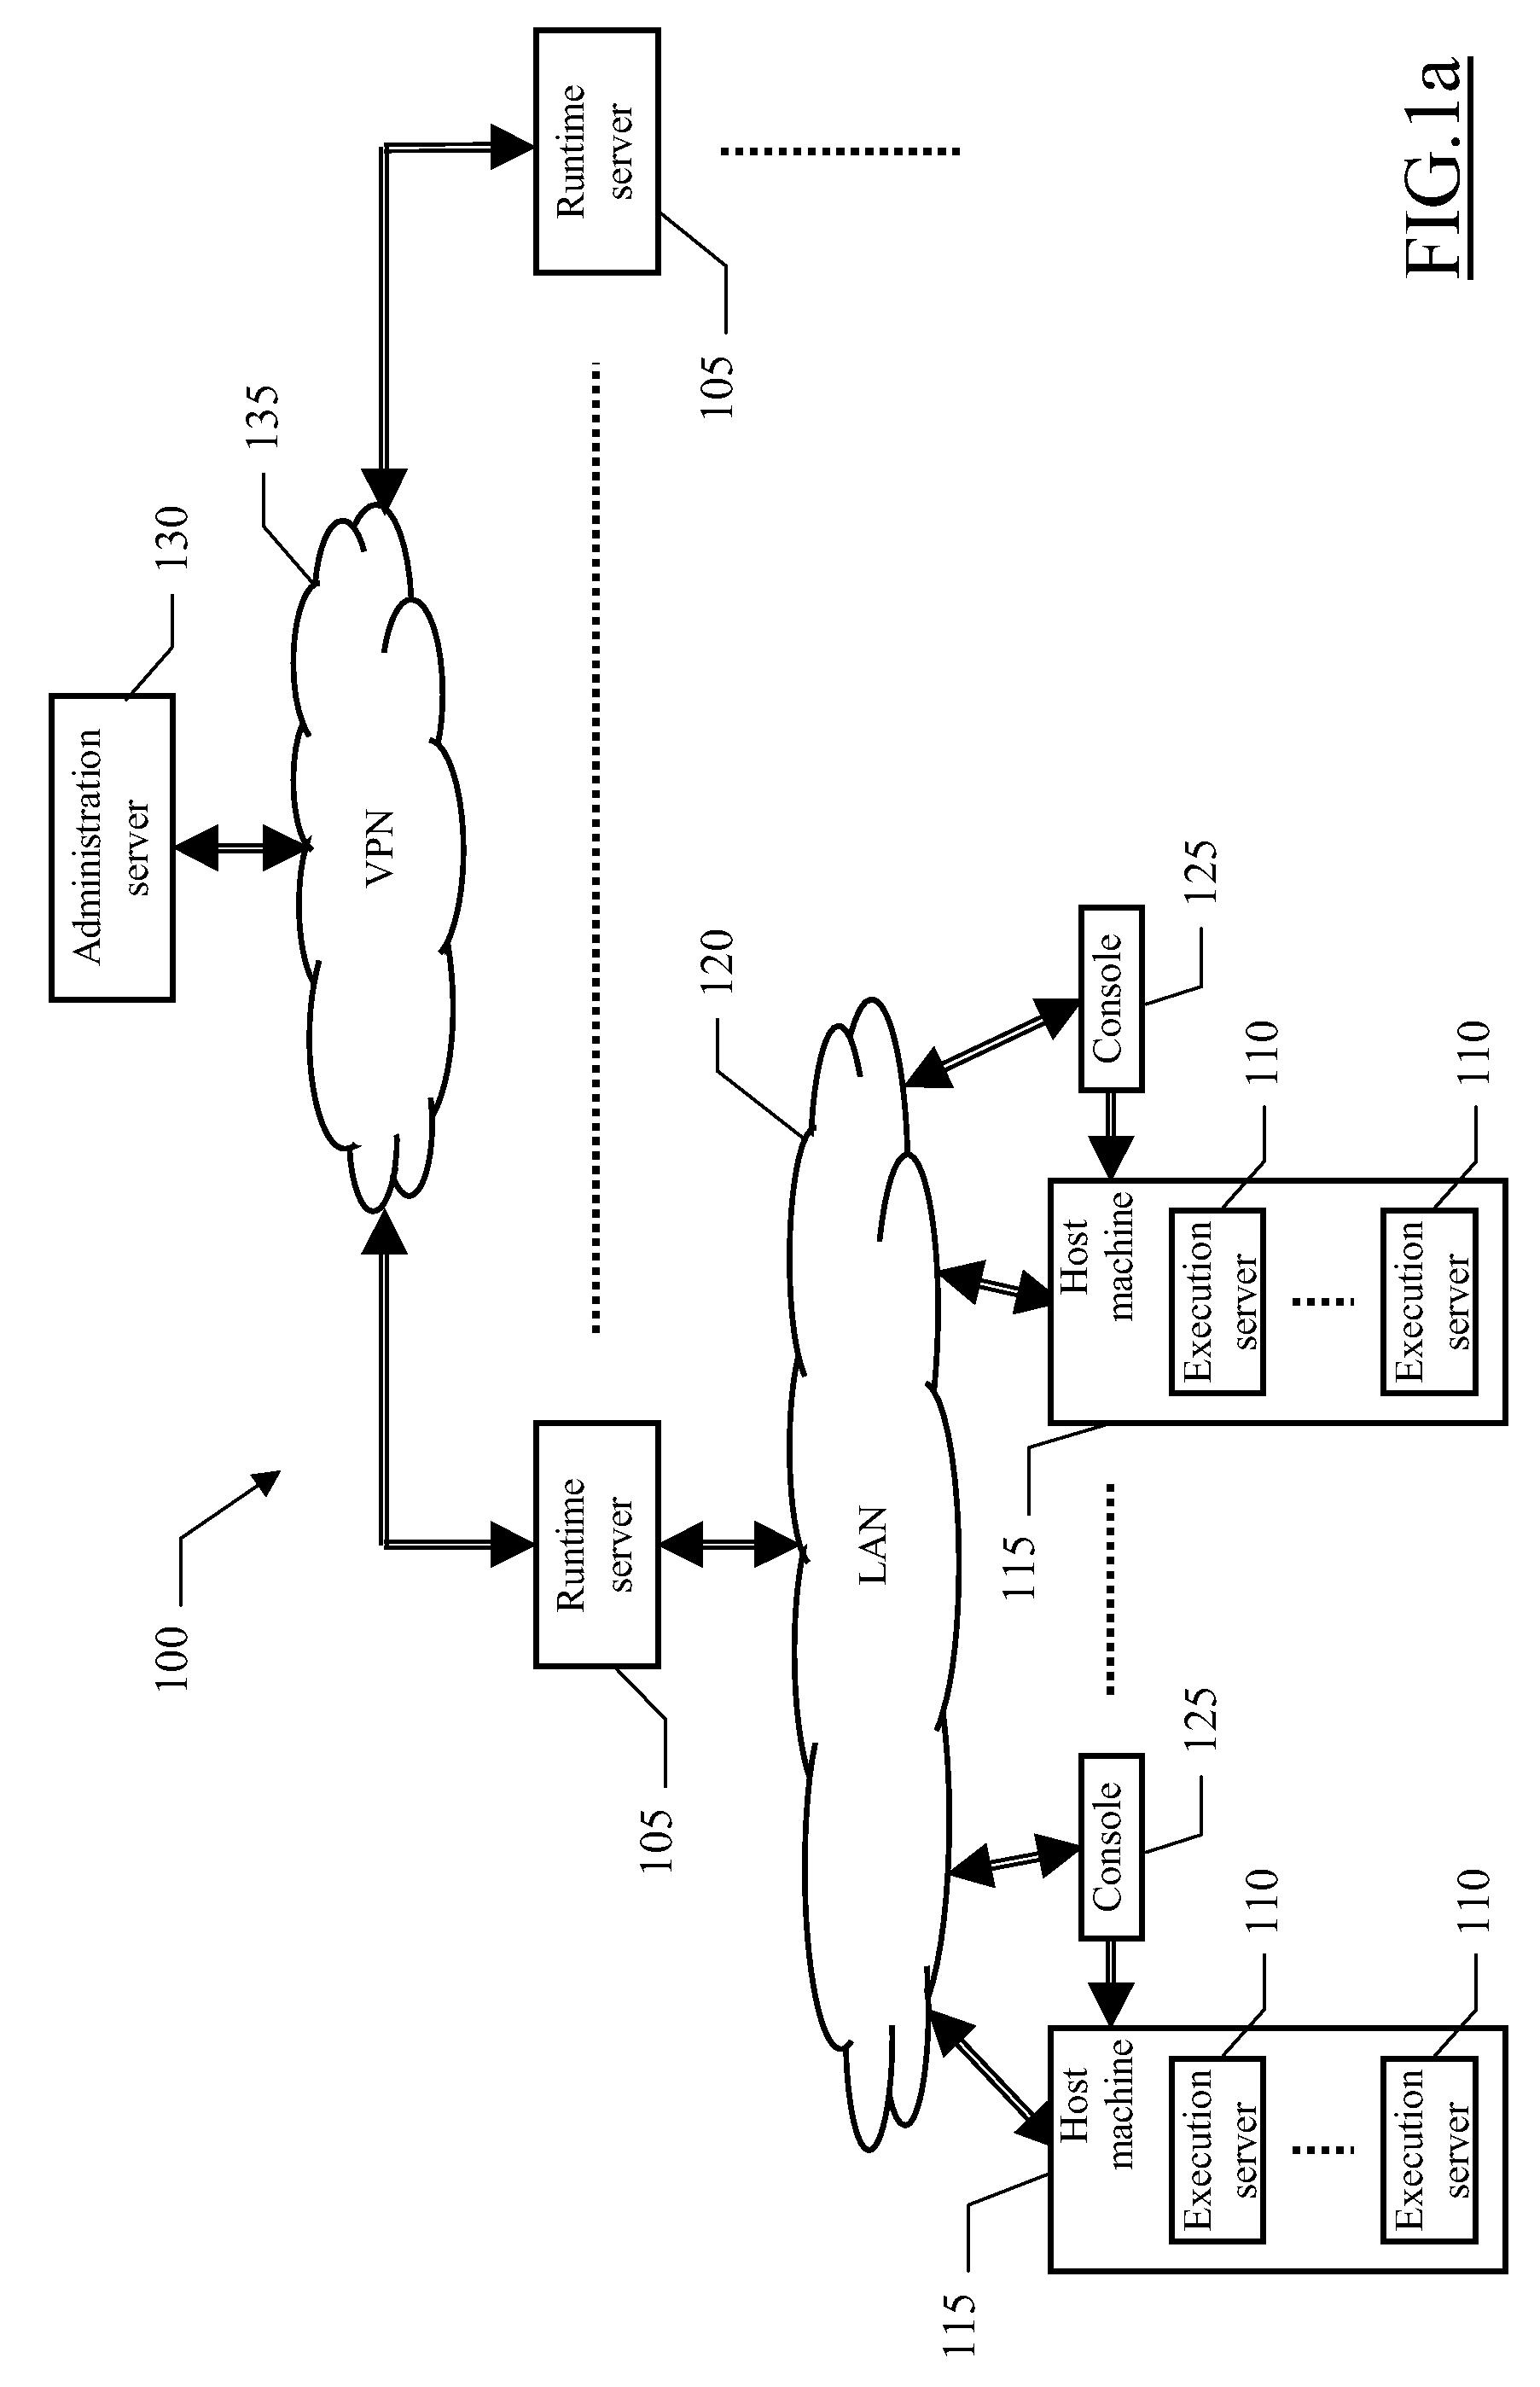 Method, system and computer program for hardware inventory in virtualized environments